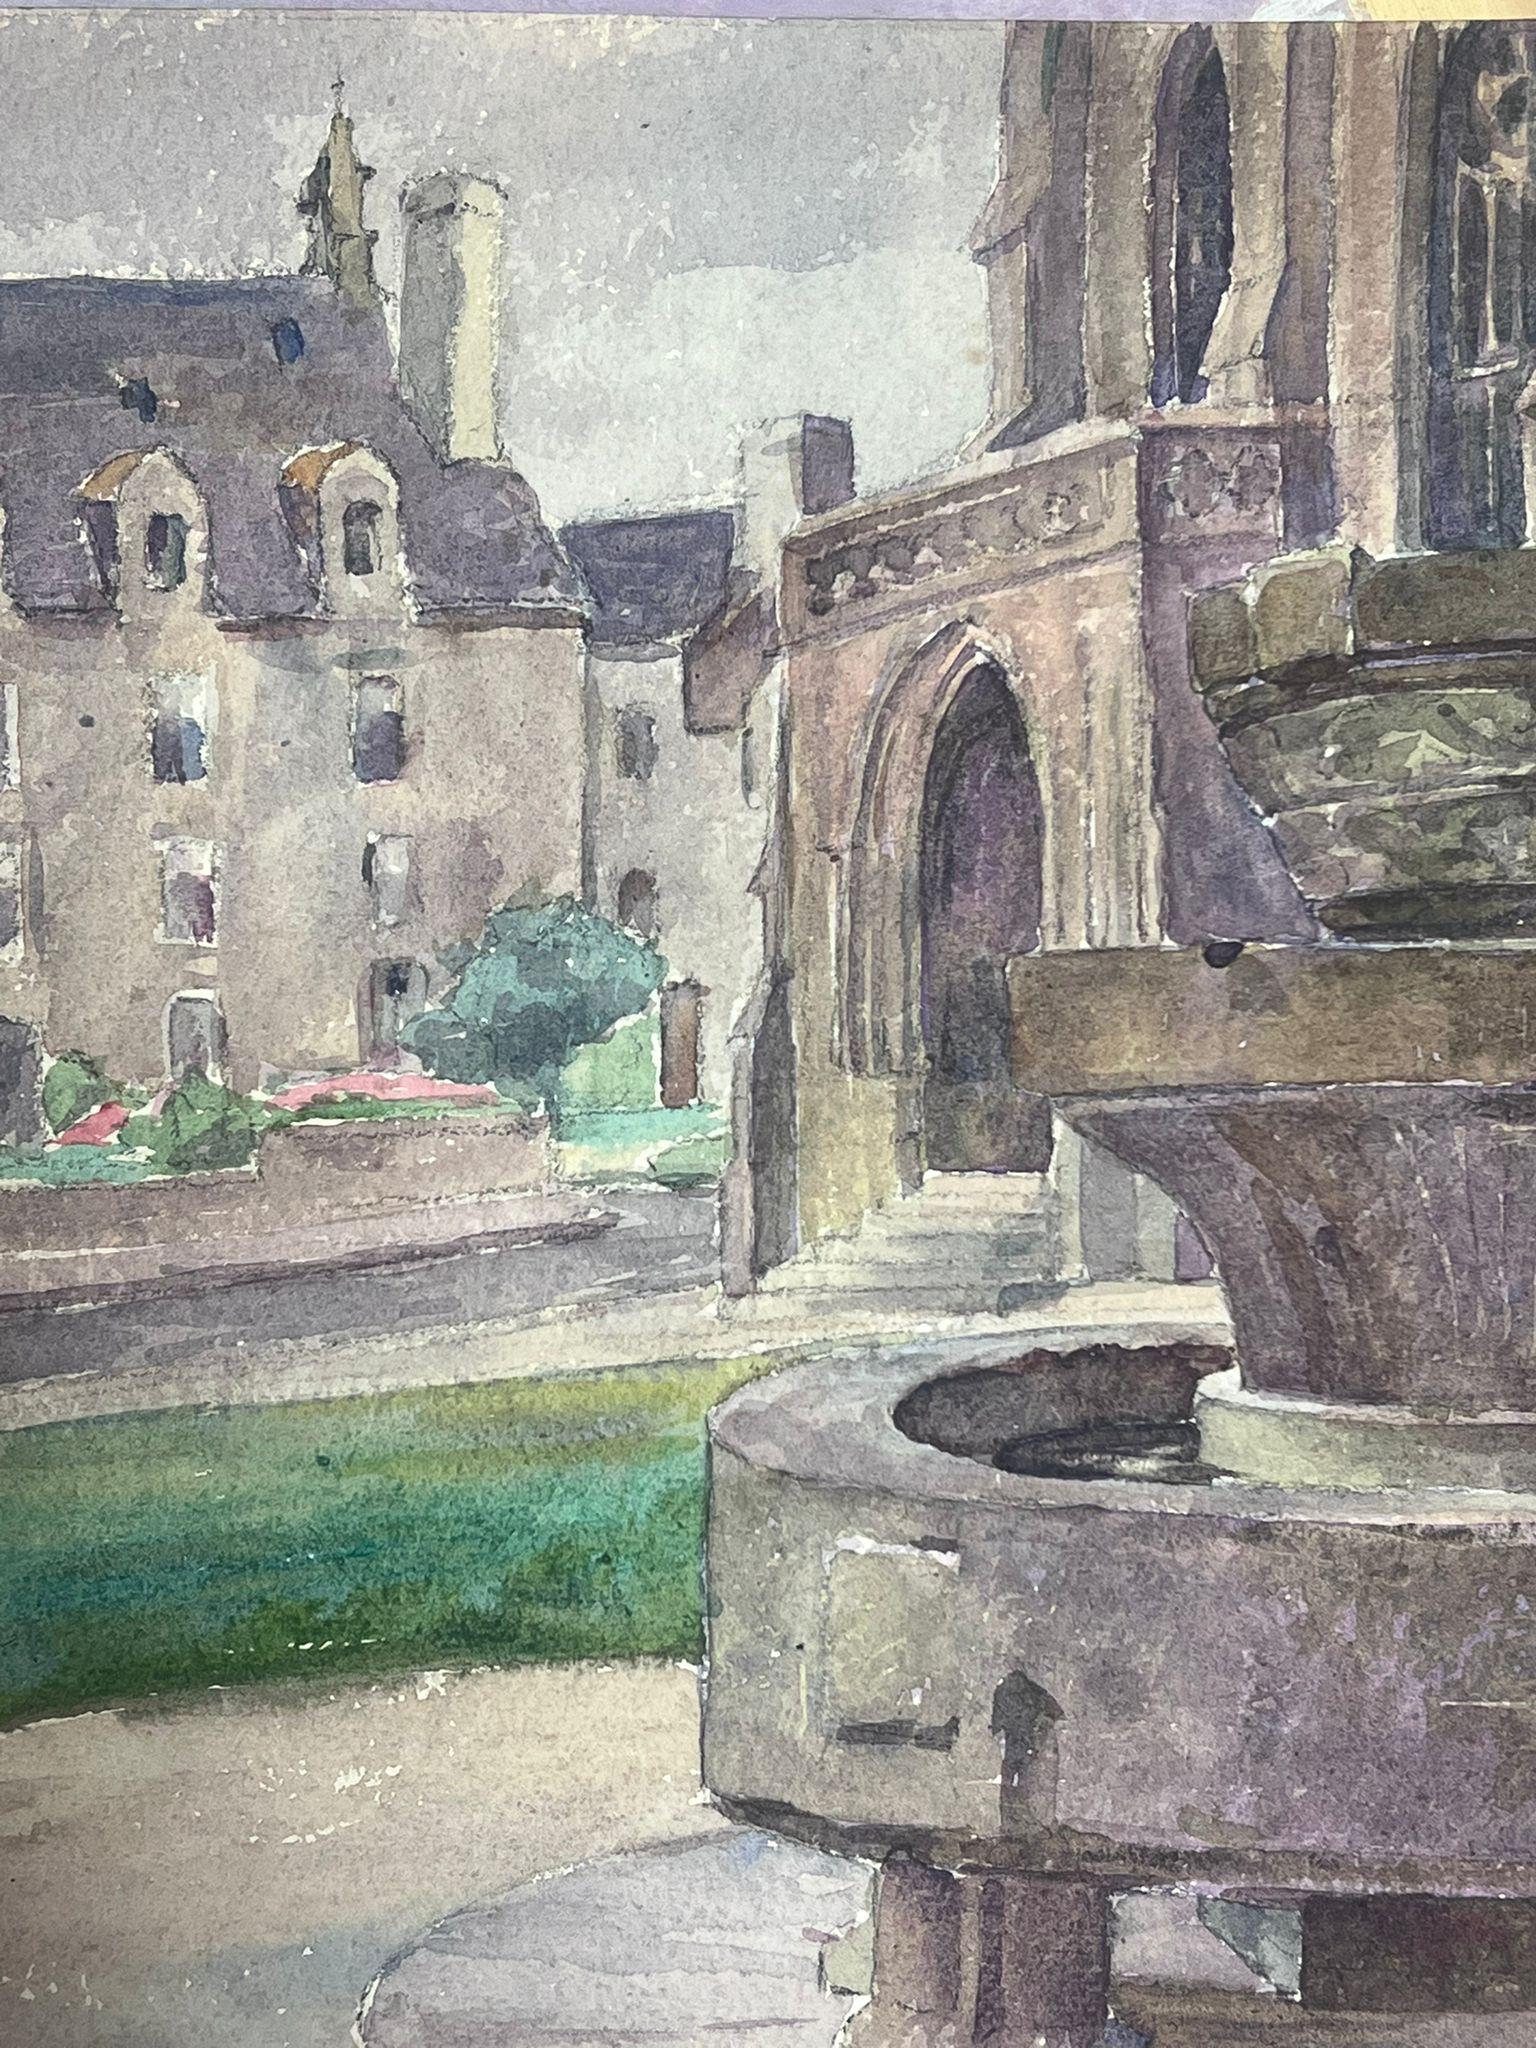 French Landscape
Y. Blanchon, French 1950's Impressionist 
watercolour on artist paper, unframed
painting: 10.5 x 13.5 inches
inscribed verso
provenance: from a large private collection of this artists work in Northern France
condition: original,